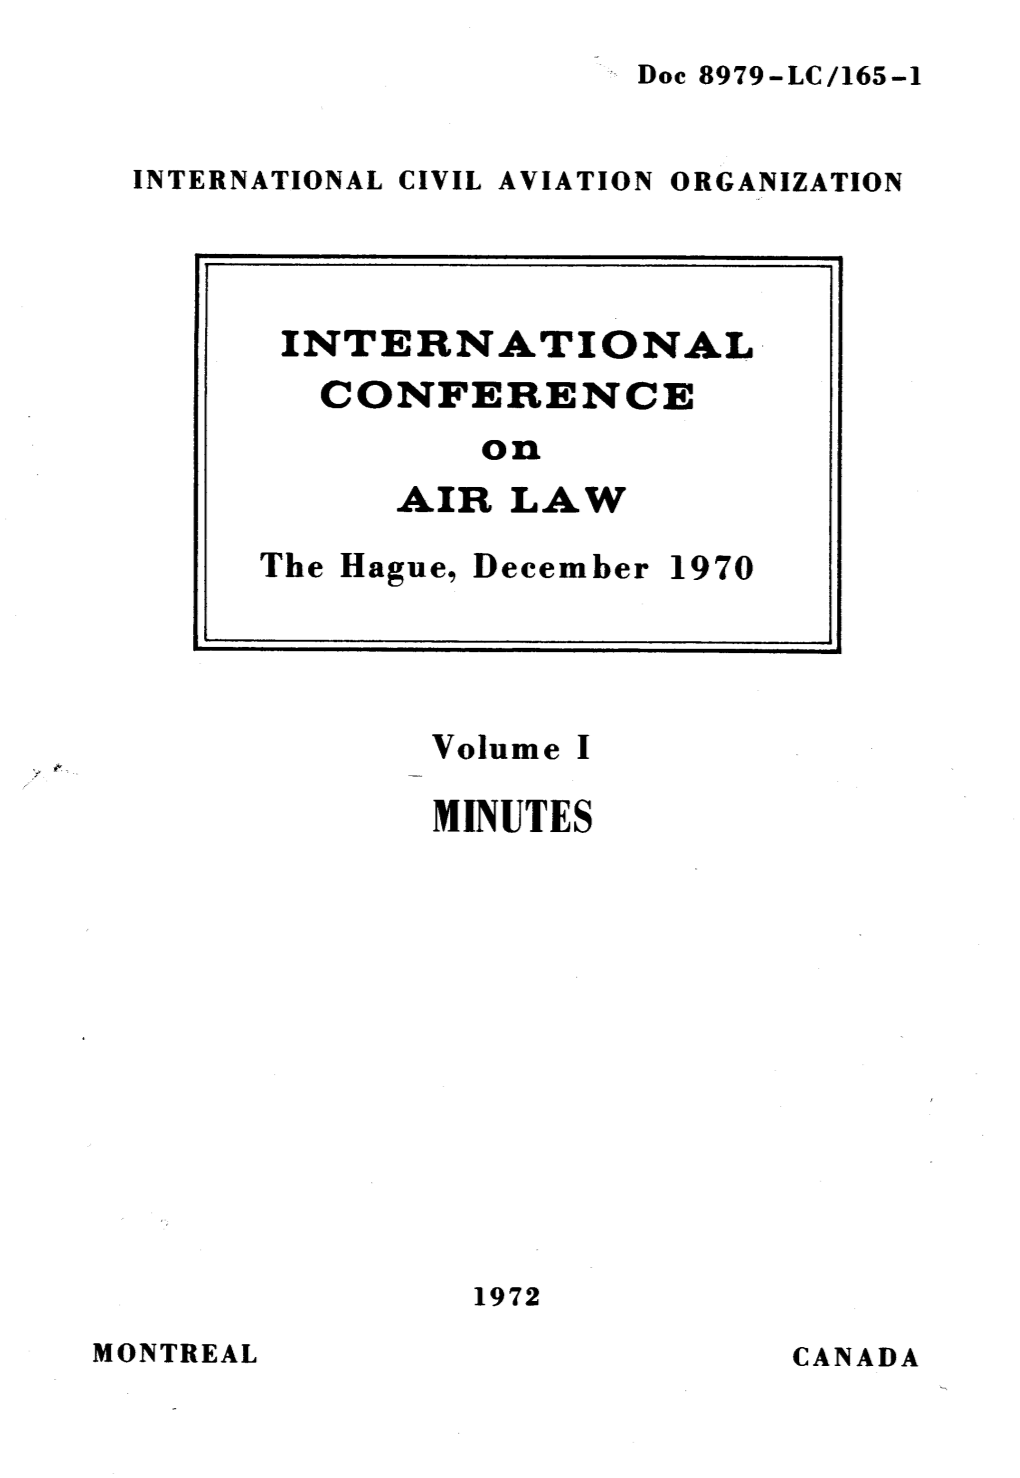 International Conference on Air Law, Volume I: Minutes